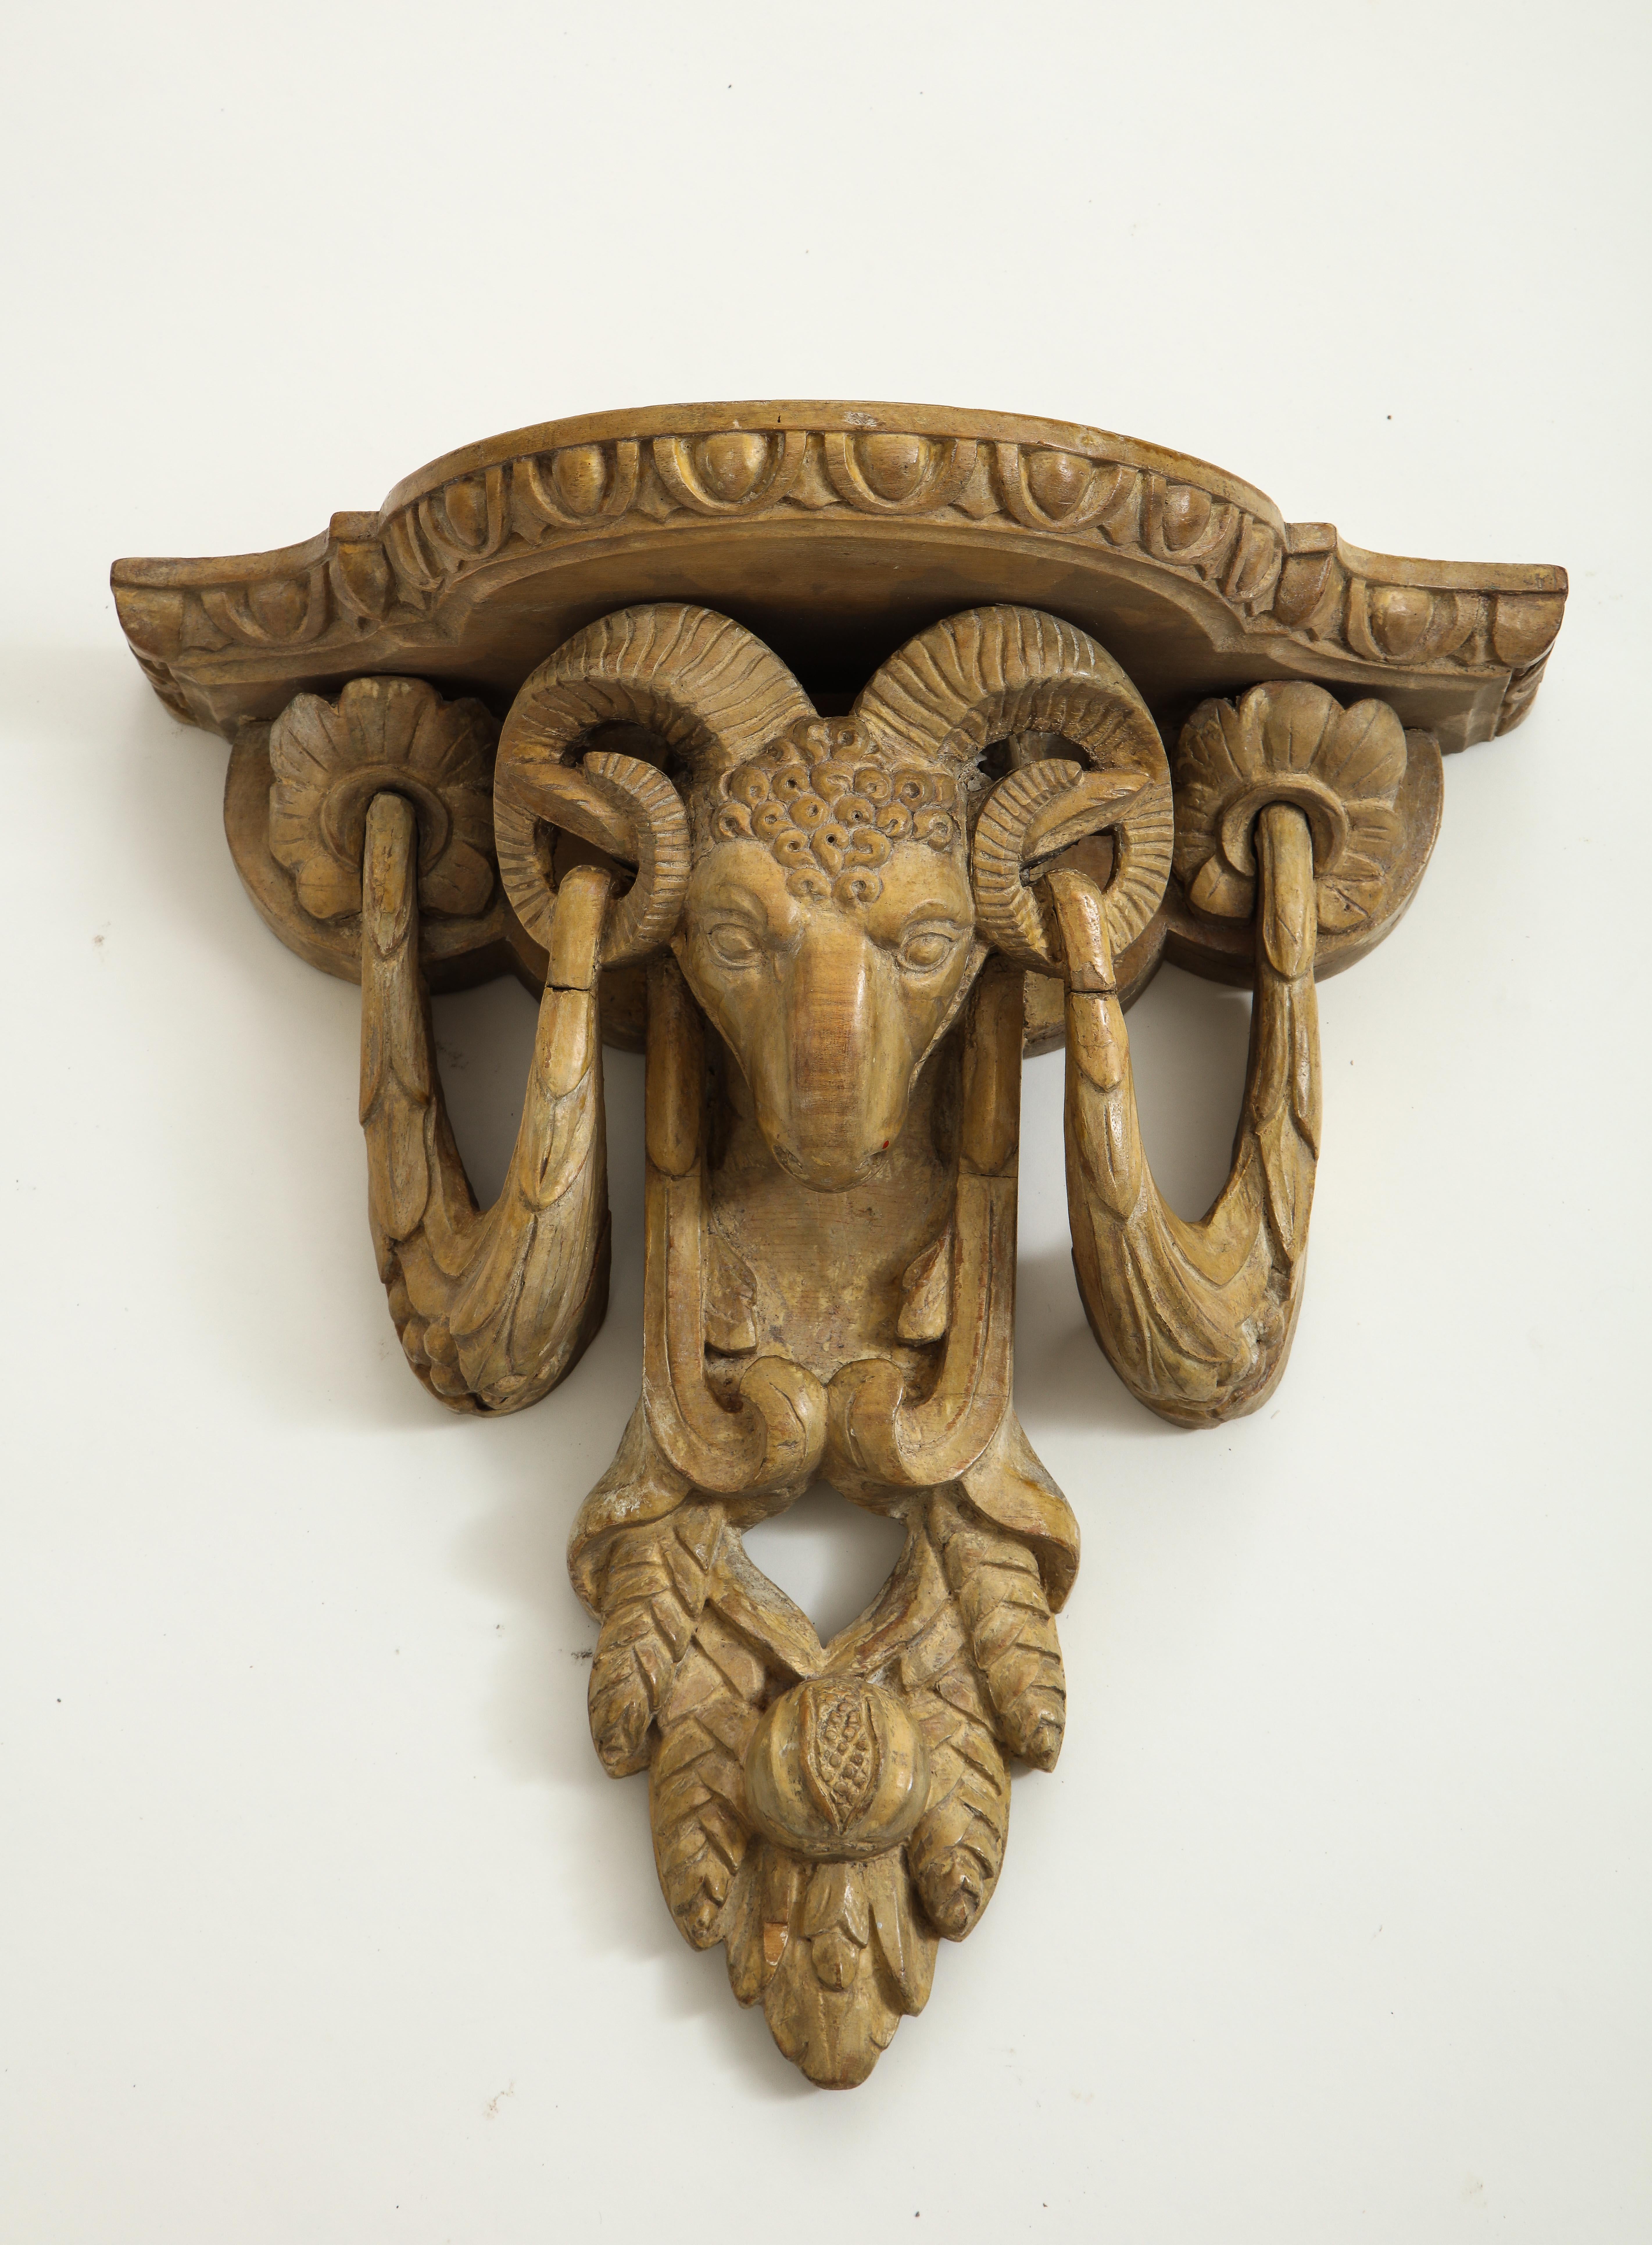 Each with shaped shelved enriched with an egg-and-dart edge over ram's head festooned with garlands with pendant acorns centered by a pomegranate; carved of limed wood.